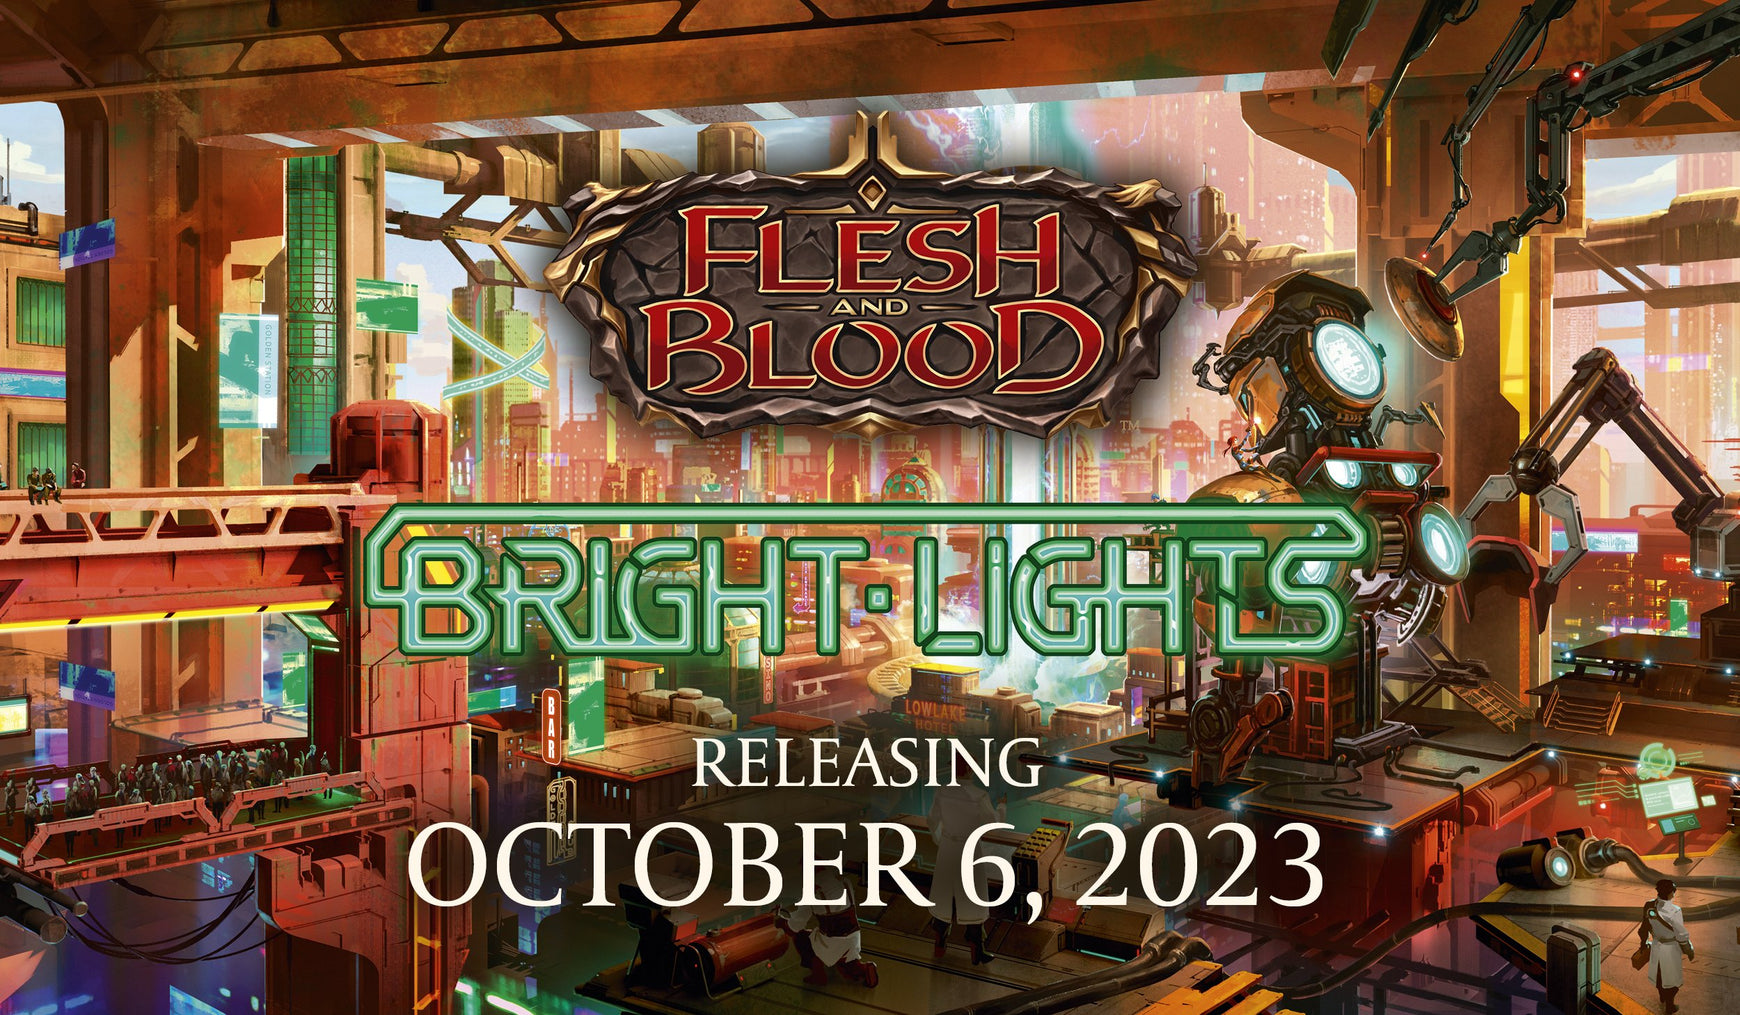 FLESH AND BLOOD BRIGHT LIGHTS RELEASES TOMORROW!